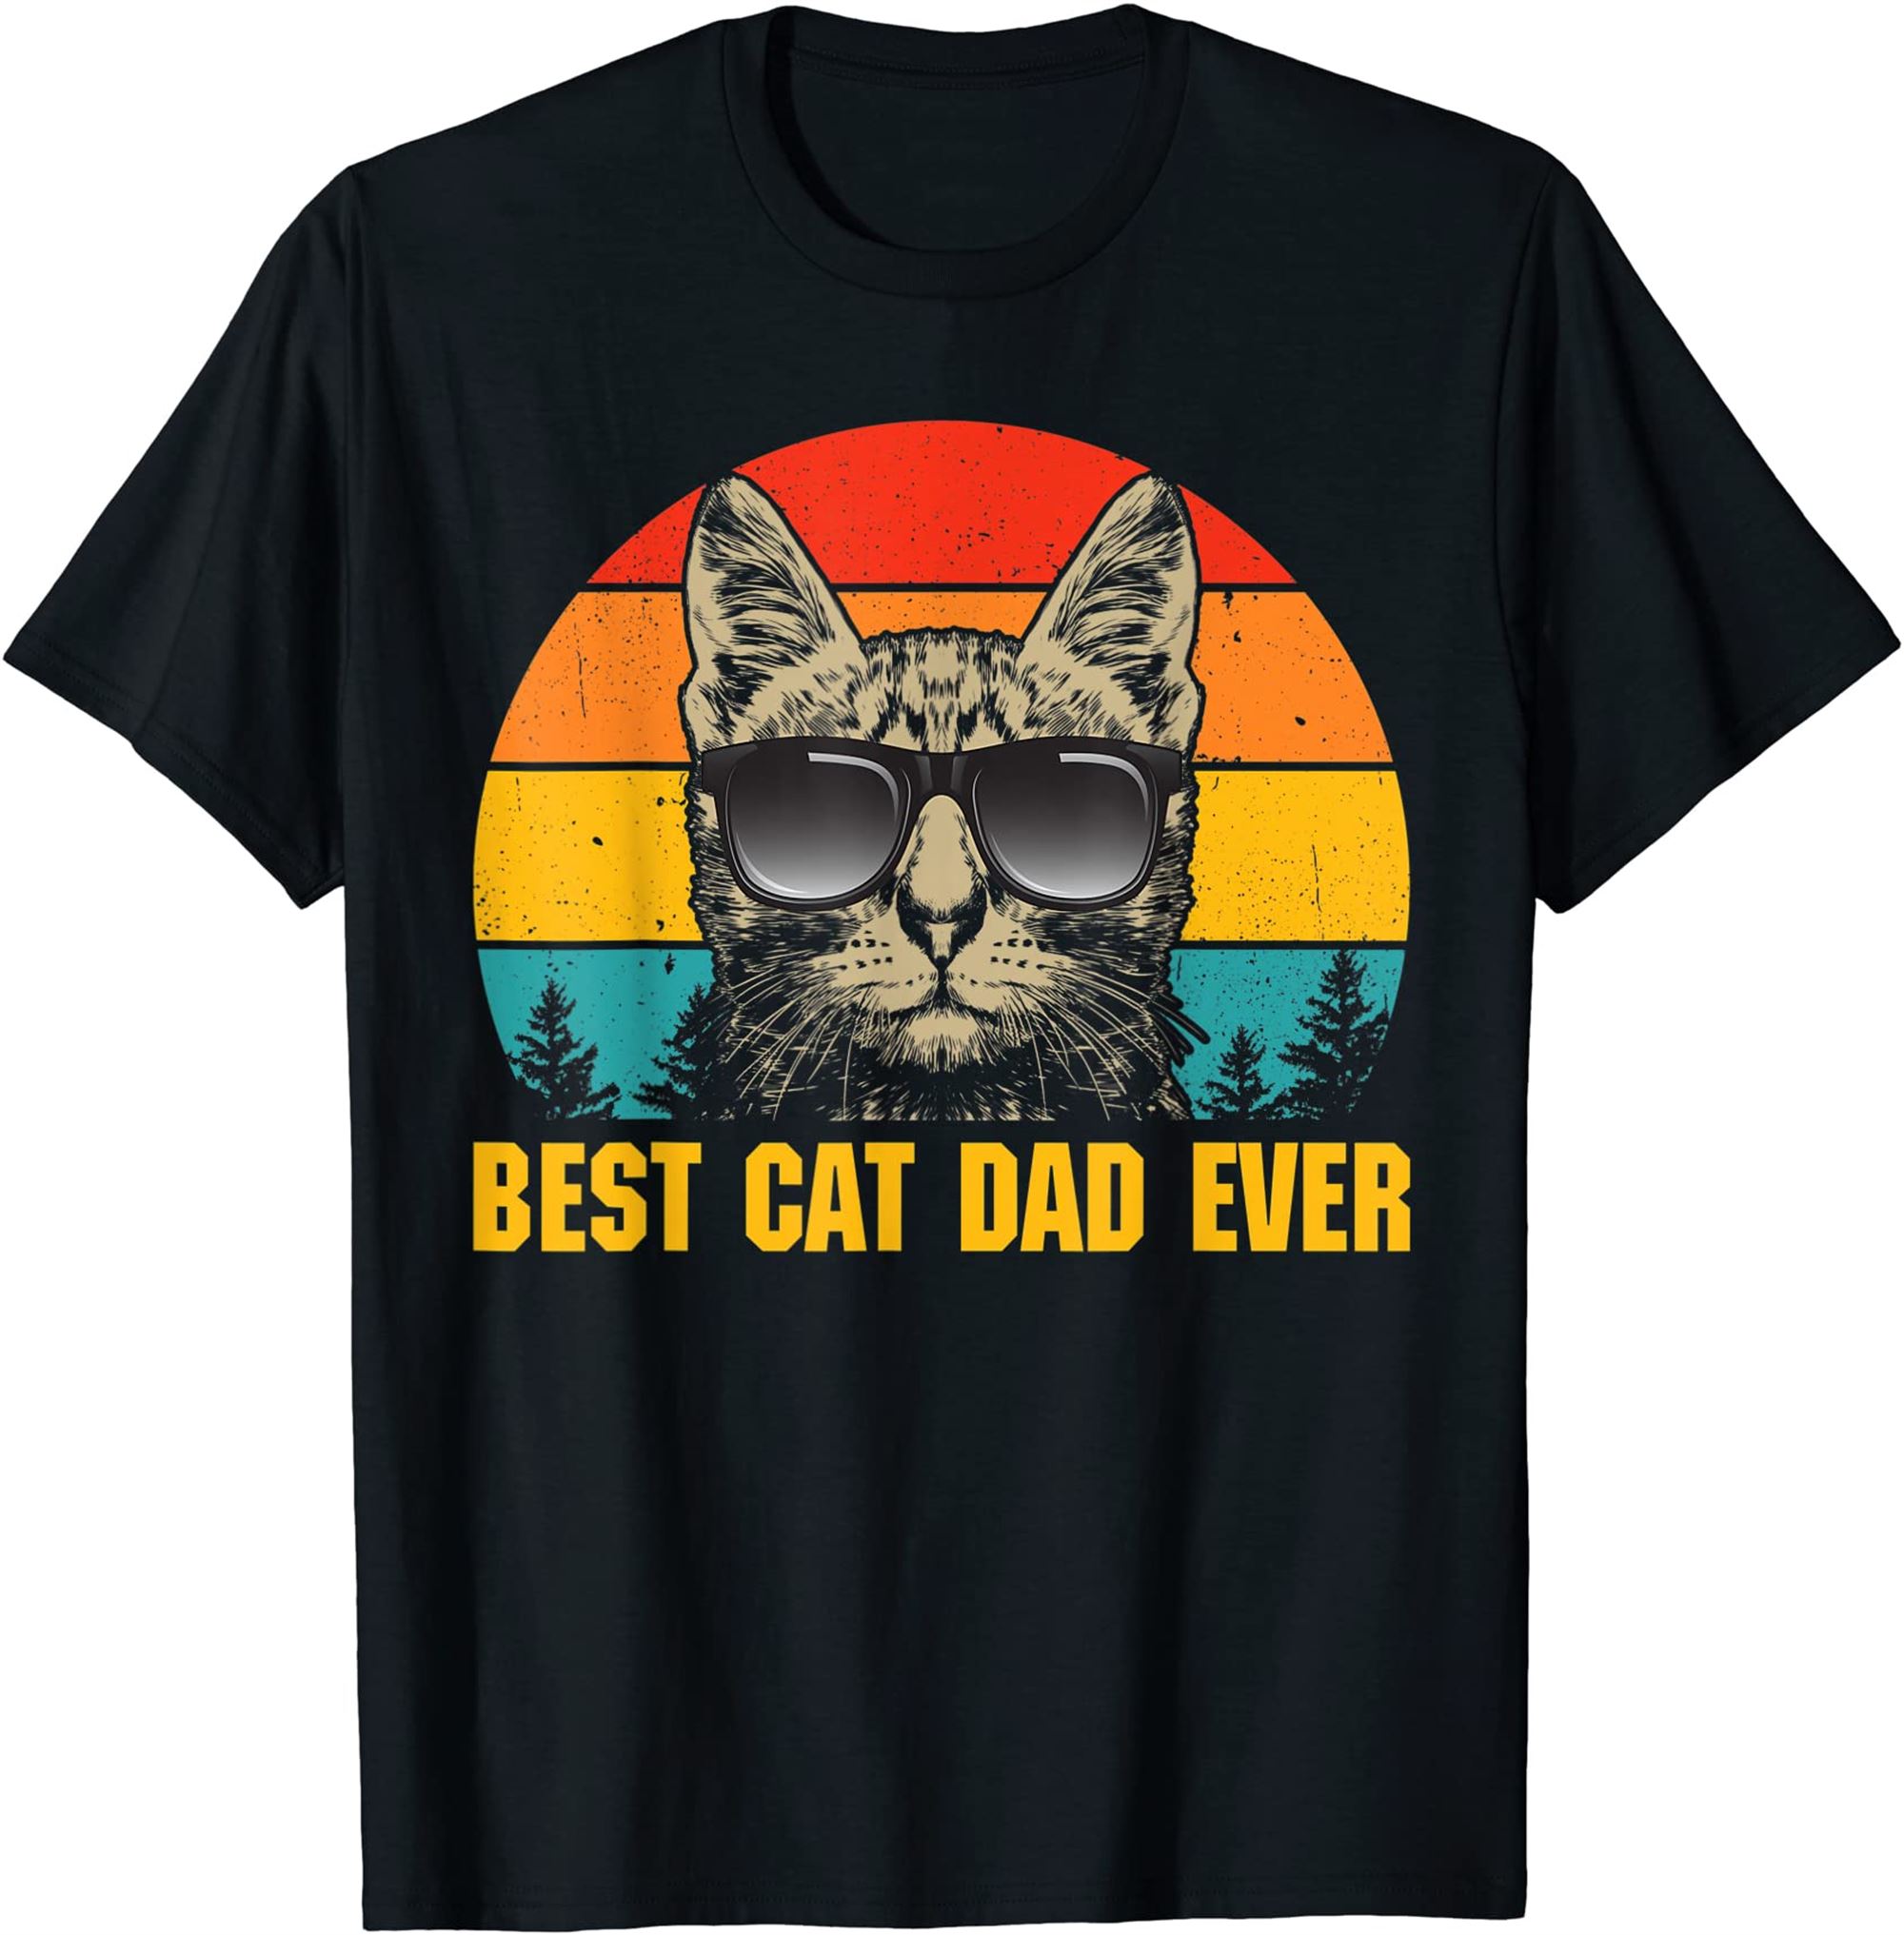 Mens Best Cat Dad Ever Tshirt For Dad On Fathers Day Cat Daddy T-shirt Full Size Up To 5xl